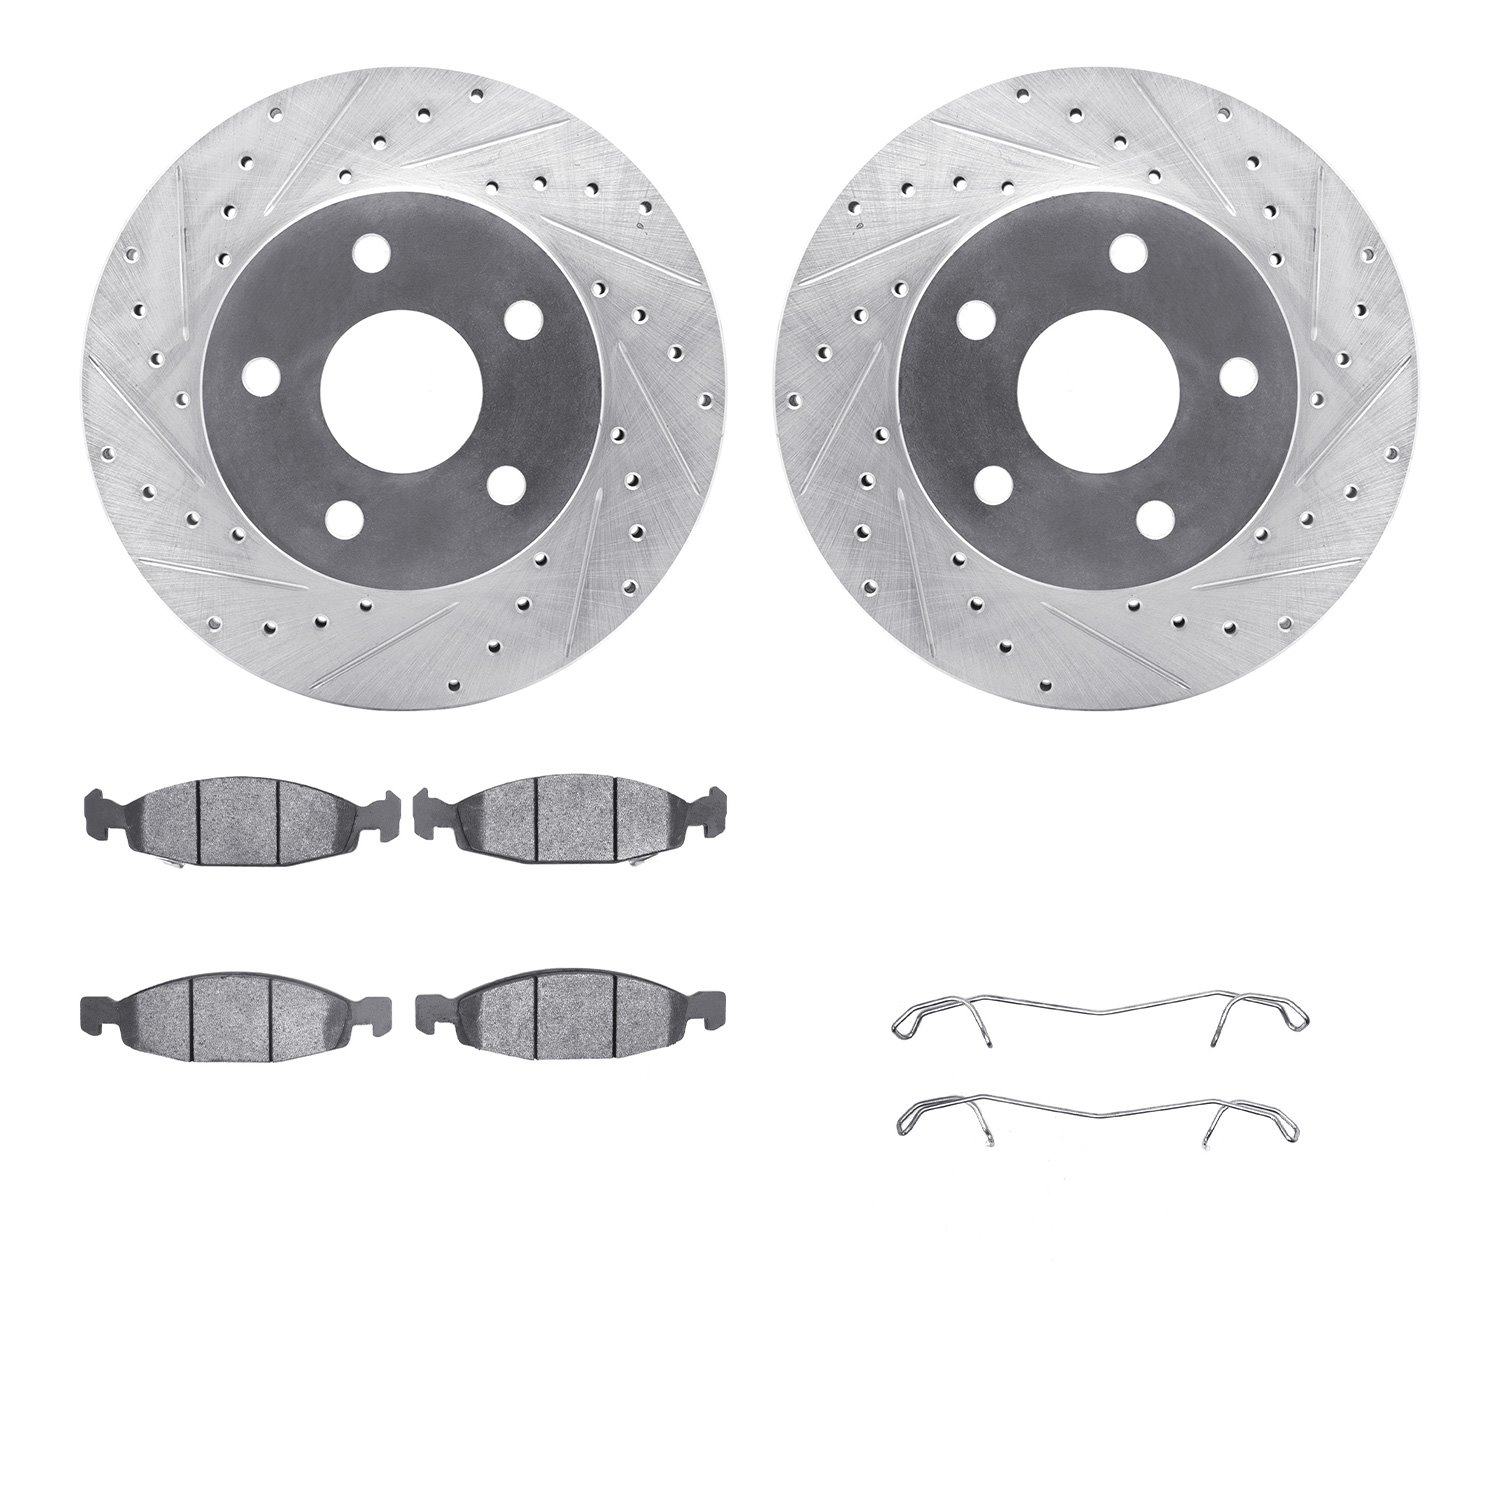 7412-42032 Drilled/Slotted Brake Rotors with Ultimate-Duty Brake Pads Kit & Hardware [Silver], 1999-2002 Mopar, Position: Front